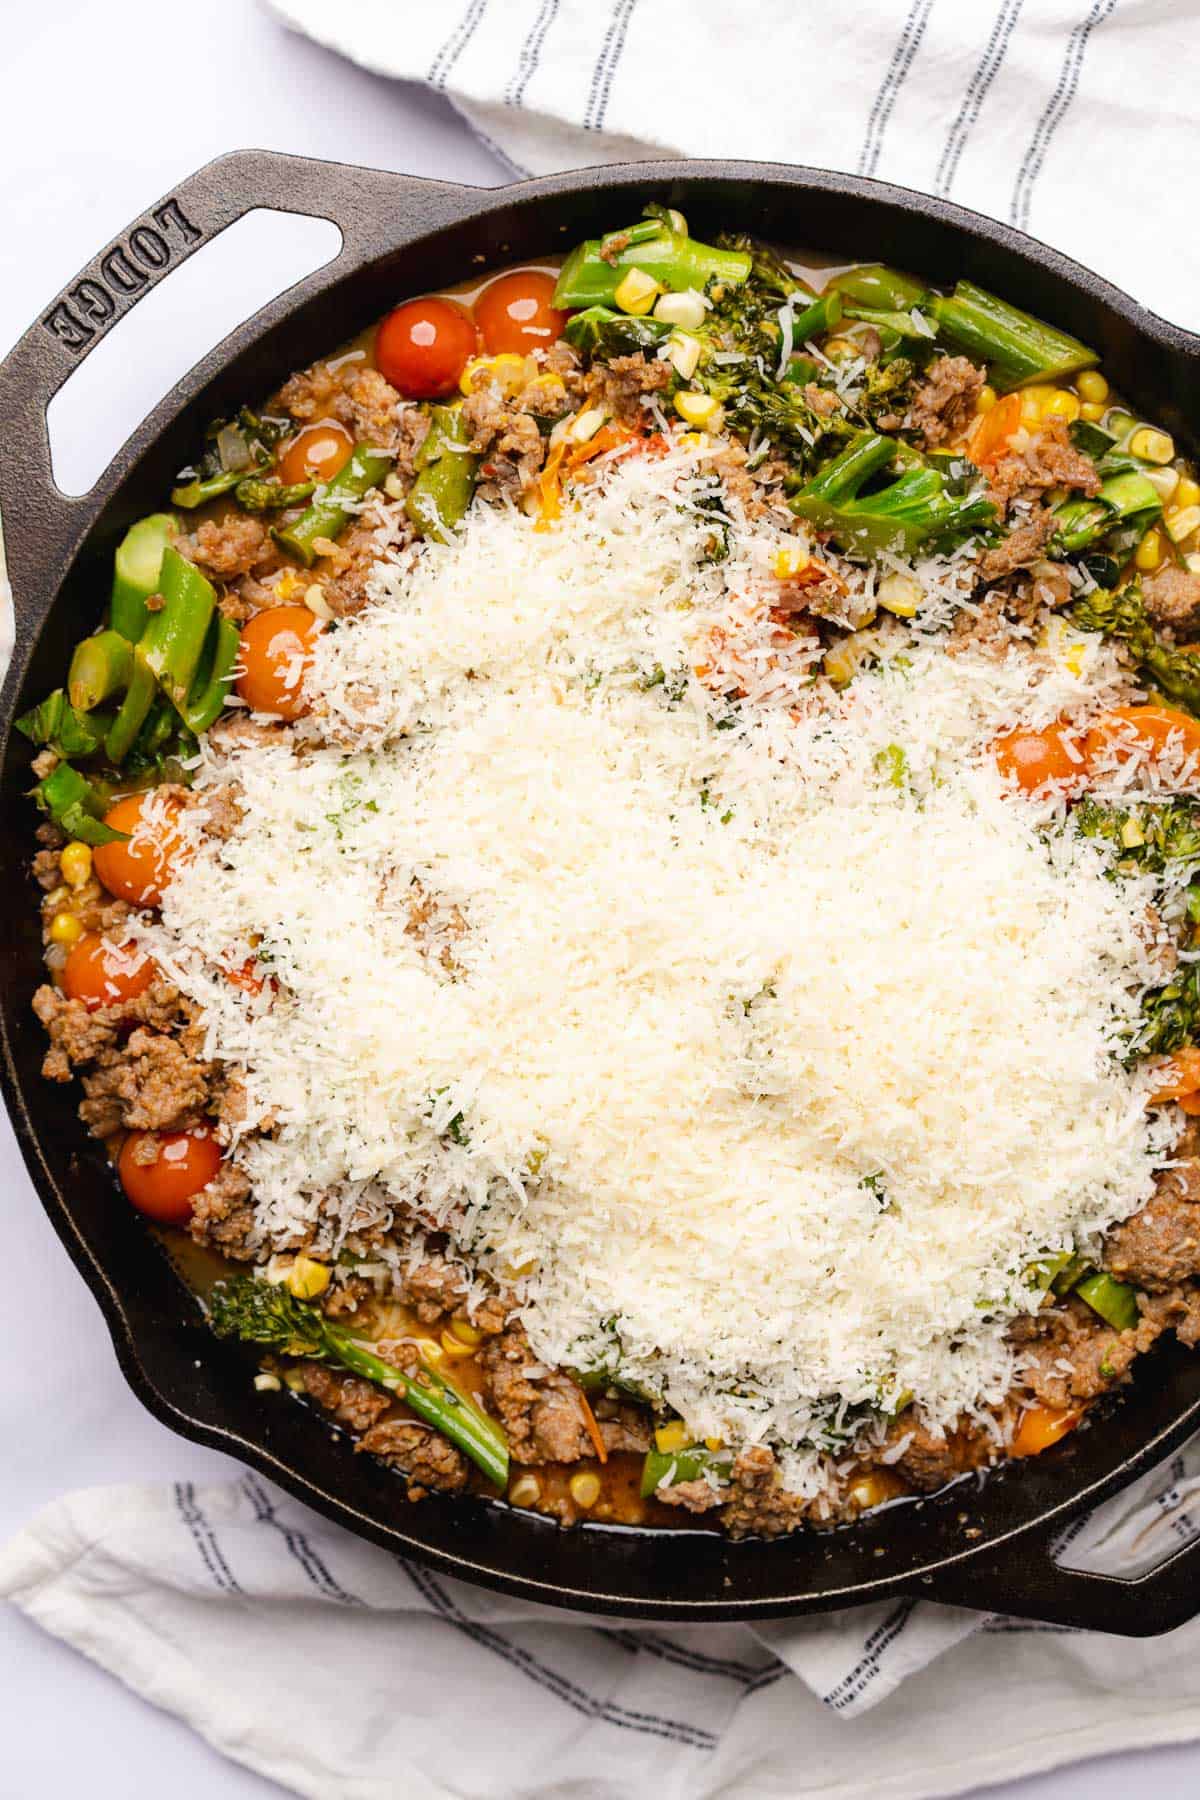 adding parmesan cheese to a skillet full of Italian sausage, corn, broccolini and tomatoes